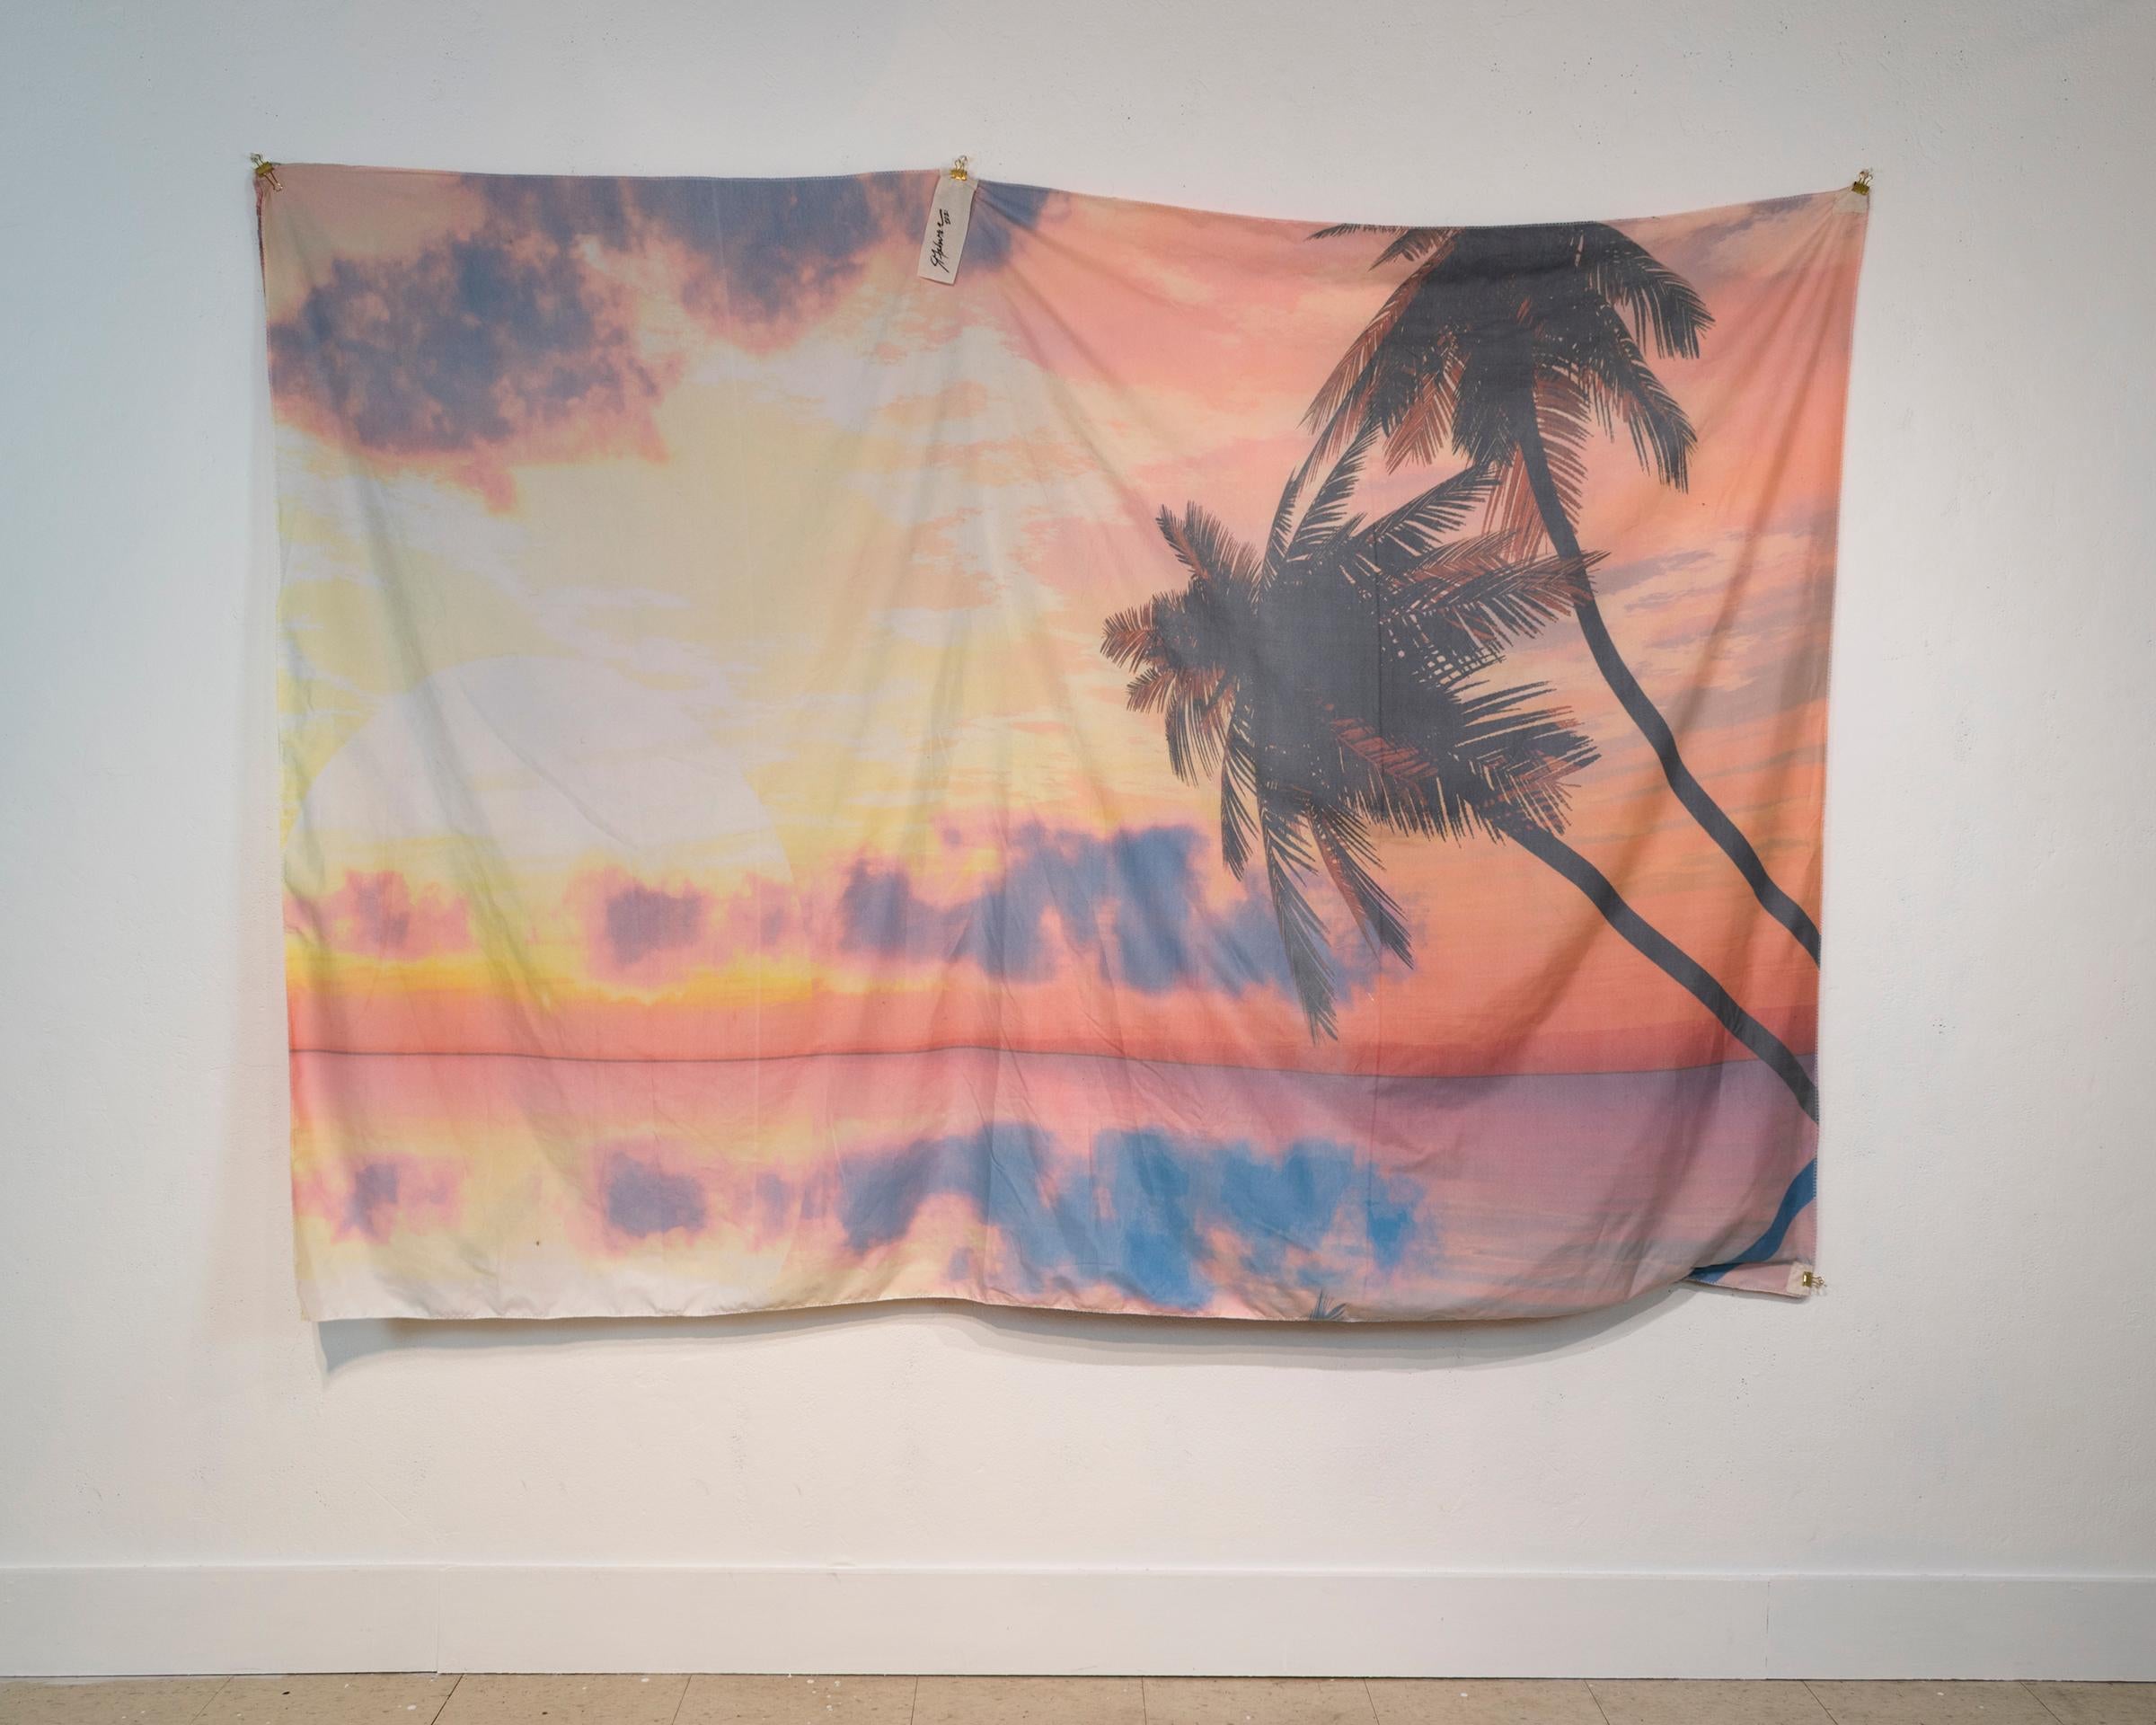 AS FAR AS A VIEW - Folded Tapestry Collage of Scenic Landscapes w/ Palm Trees - Brown Landscape Photograph by McLean Fahnestock